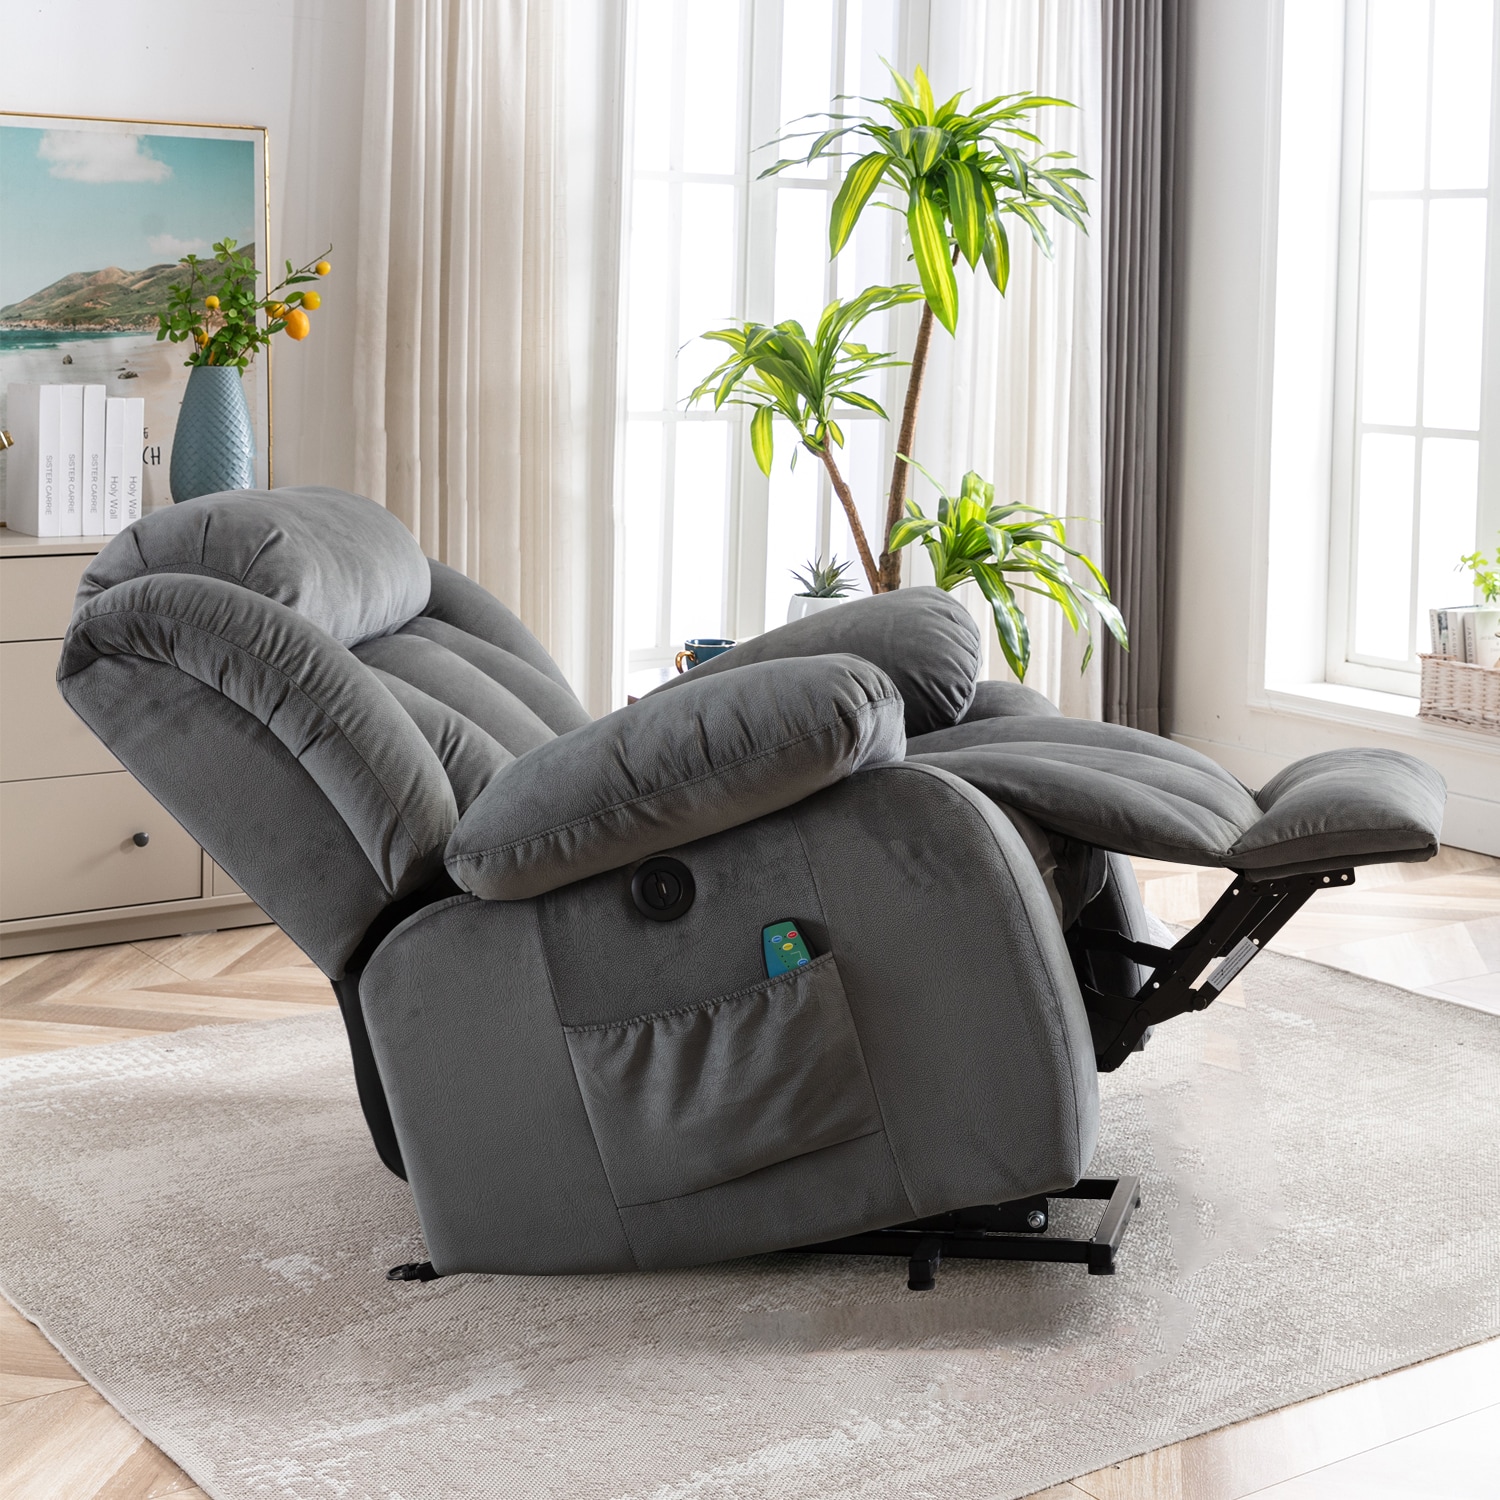 Armen Living Claude Dual Power Headrest and Lumbar Support Recliner Chair in Light Grey Genuine Leather